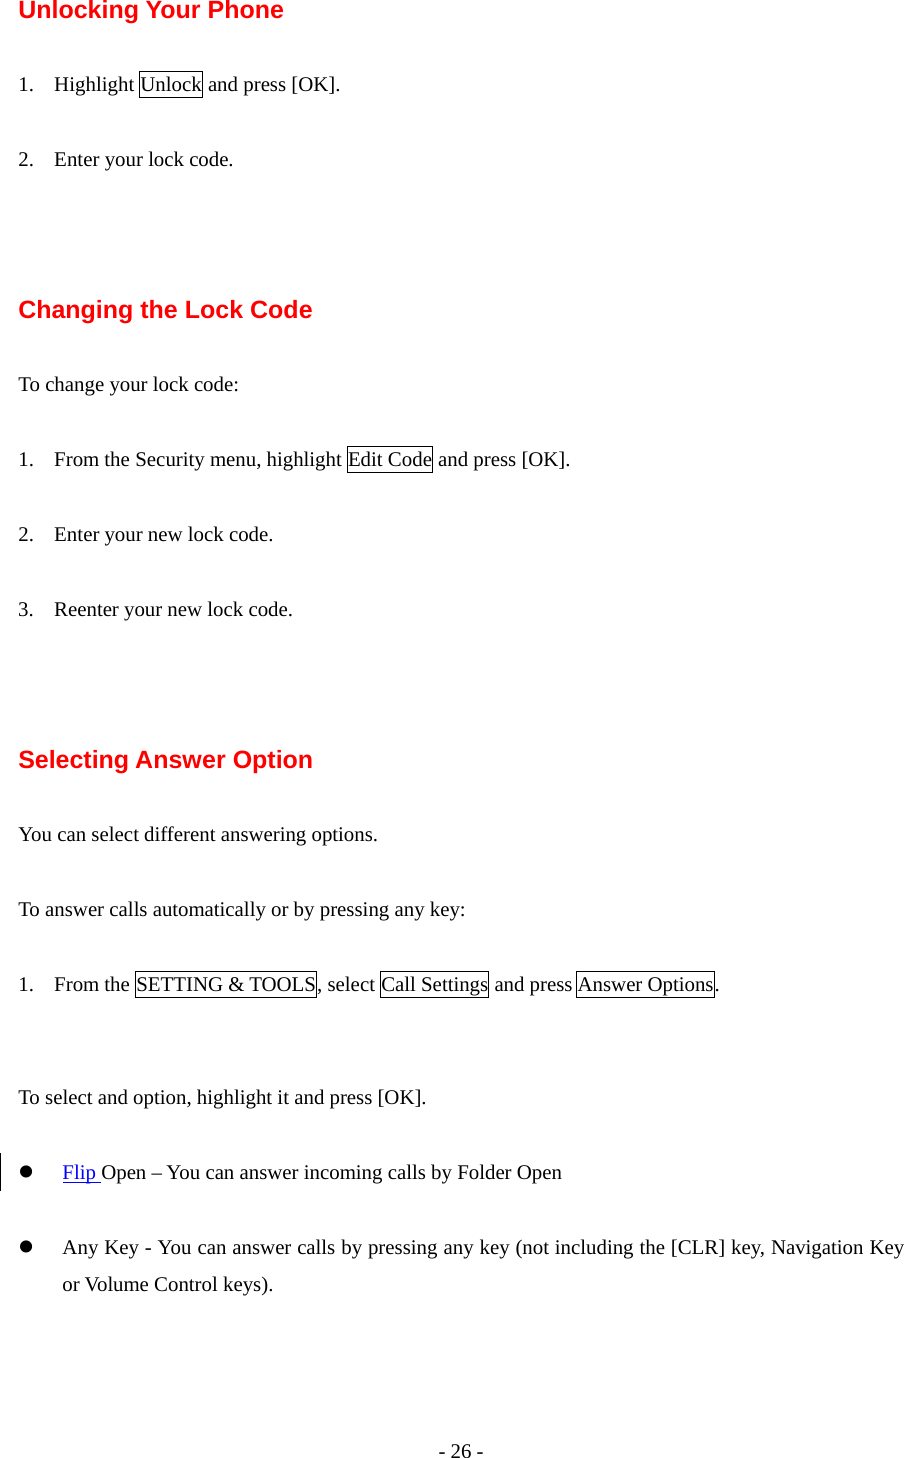 - 26 - Unlocking Your Phone  1. Highlight Unlock and press [OK].  2. Enter your lock code.    Changing the Lock Code  To change your lock code:  1. From the Security menu, highlight Edit Code and press [OK].  2. Enter your new lock code.  3. Reenter your new lock code.    Selecting Answer Option  You can select different answering options.  To answer calls automatically or by pressing any key:  1. From the SETTING &amp; TOOLS, select Call Settings and press Answer Options.   To select and option, highlight it and press [OK].  z Flip Open – You can answer incoming calls by Folder Open  z Any Key - You can answer calls by pressing any key (not including the [CLR] key, Navigation Key or Volume Control keys).  